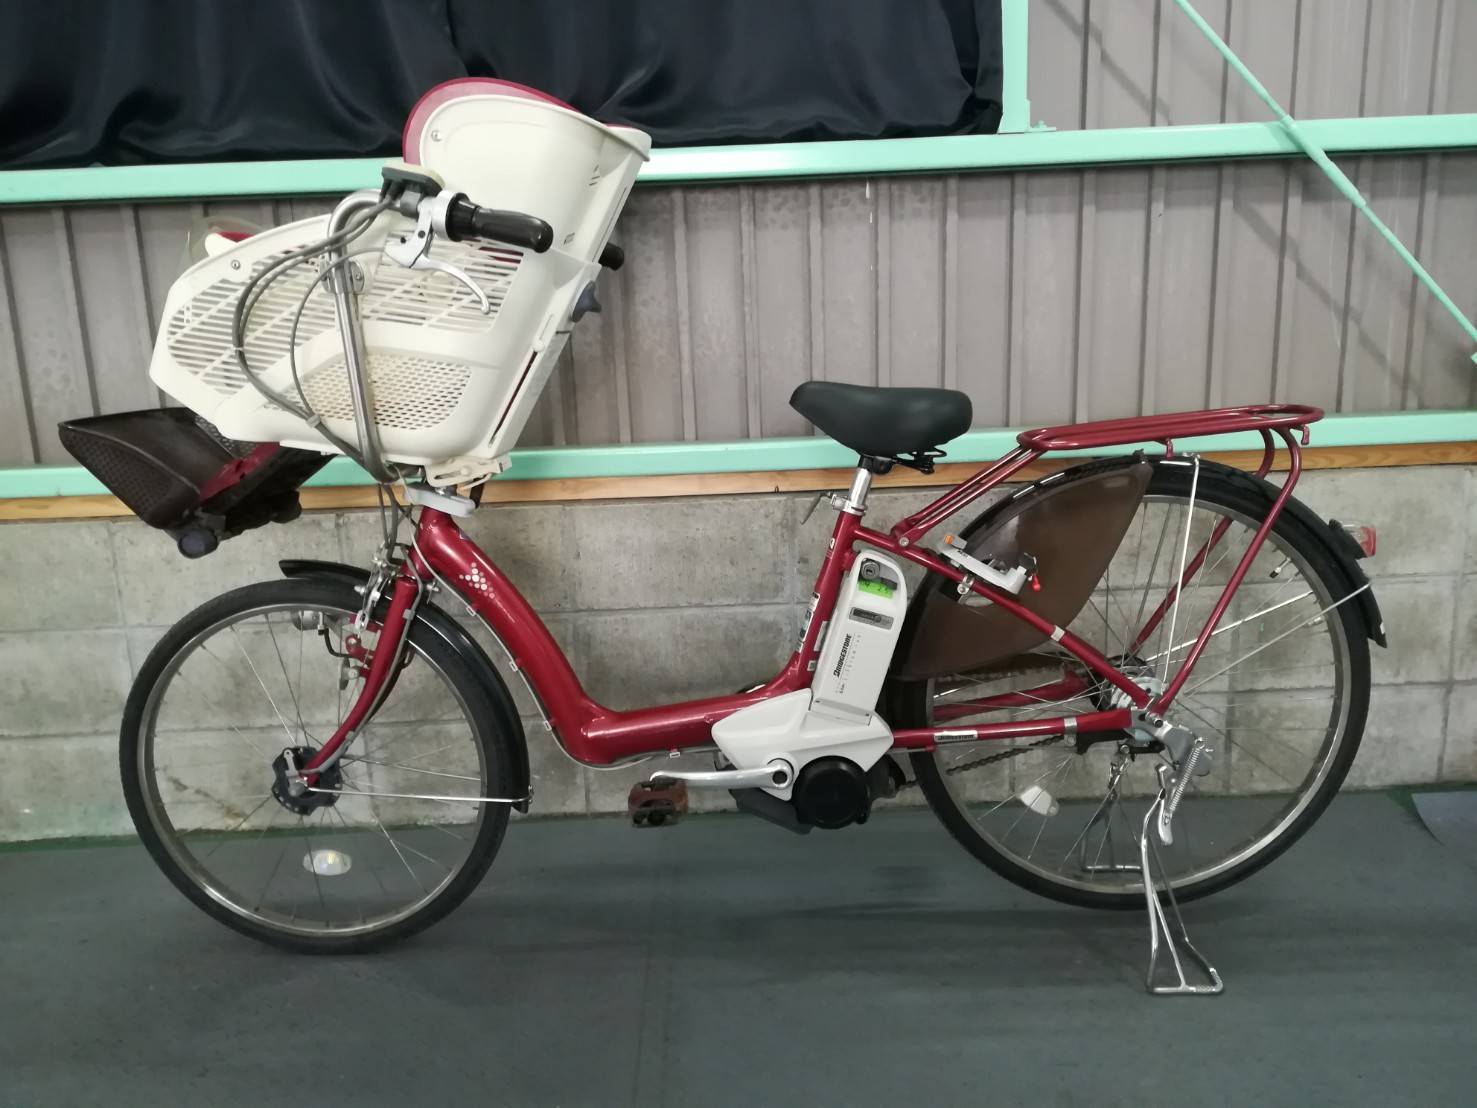 【SOLD OUT】電動自転車 ブリヂストン アンジェリーノ 子供乗せ 22/26インチ 赤 6Ah | 国産・中古の激安電動アシスト自転車を